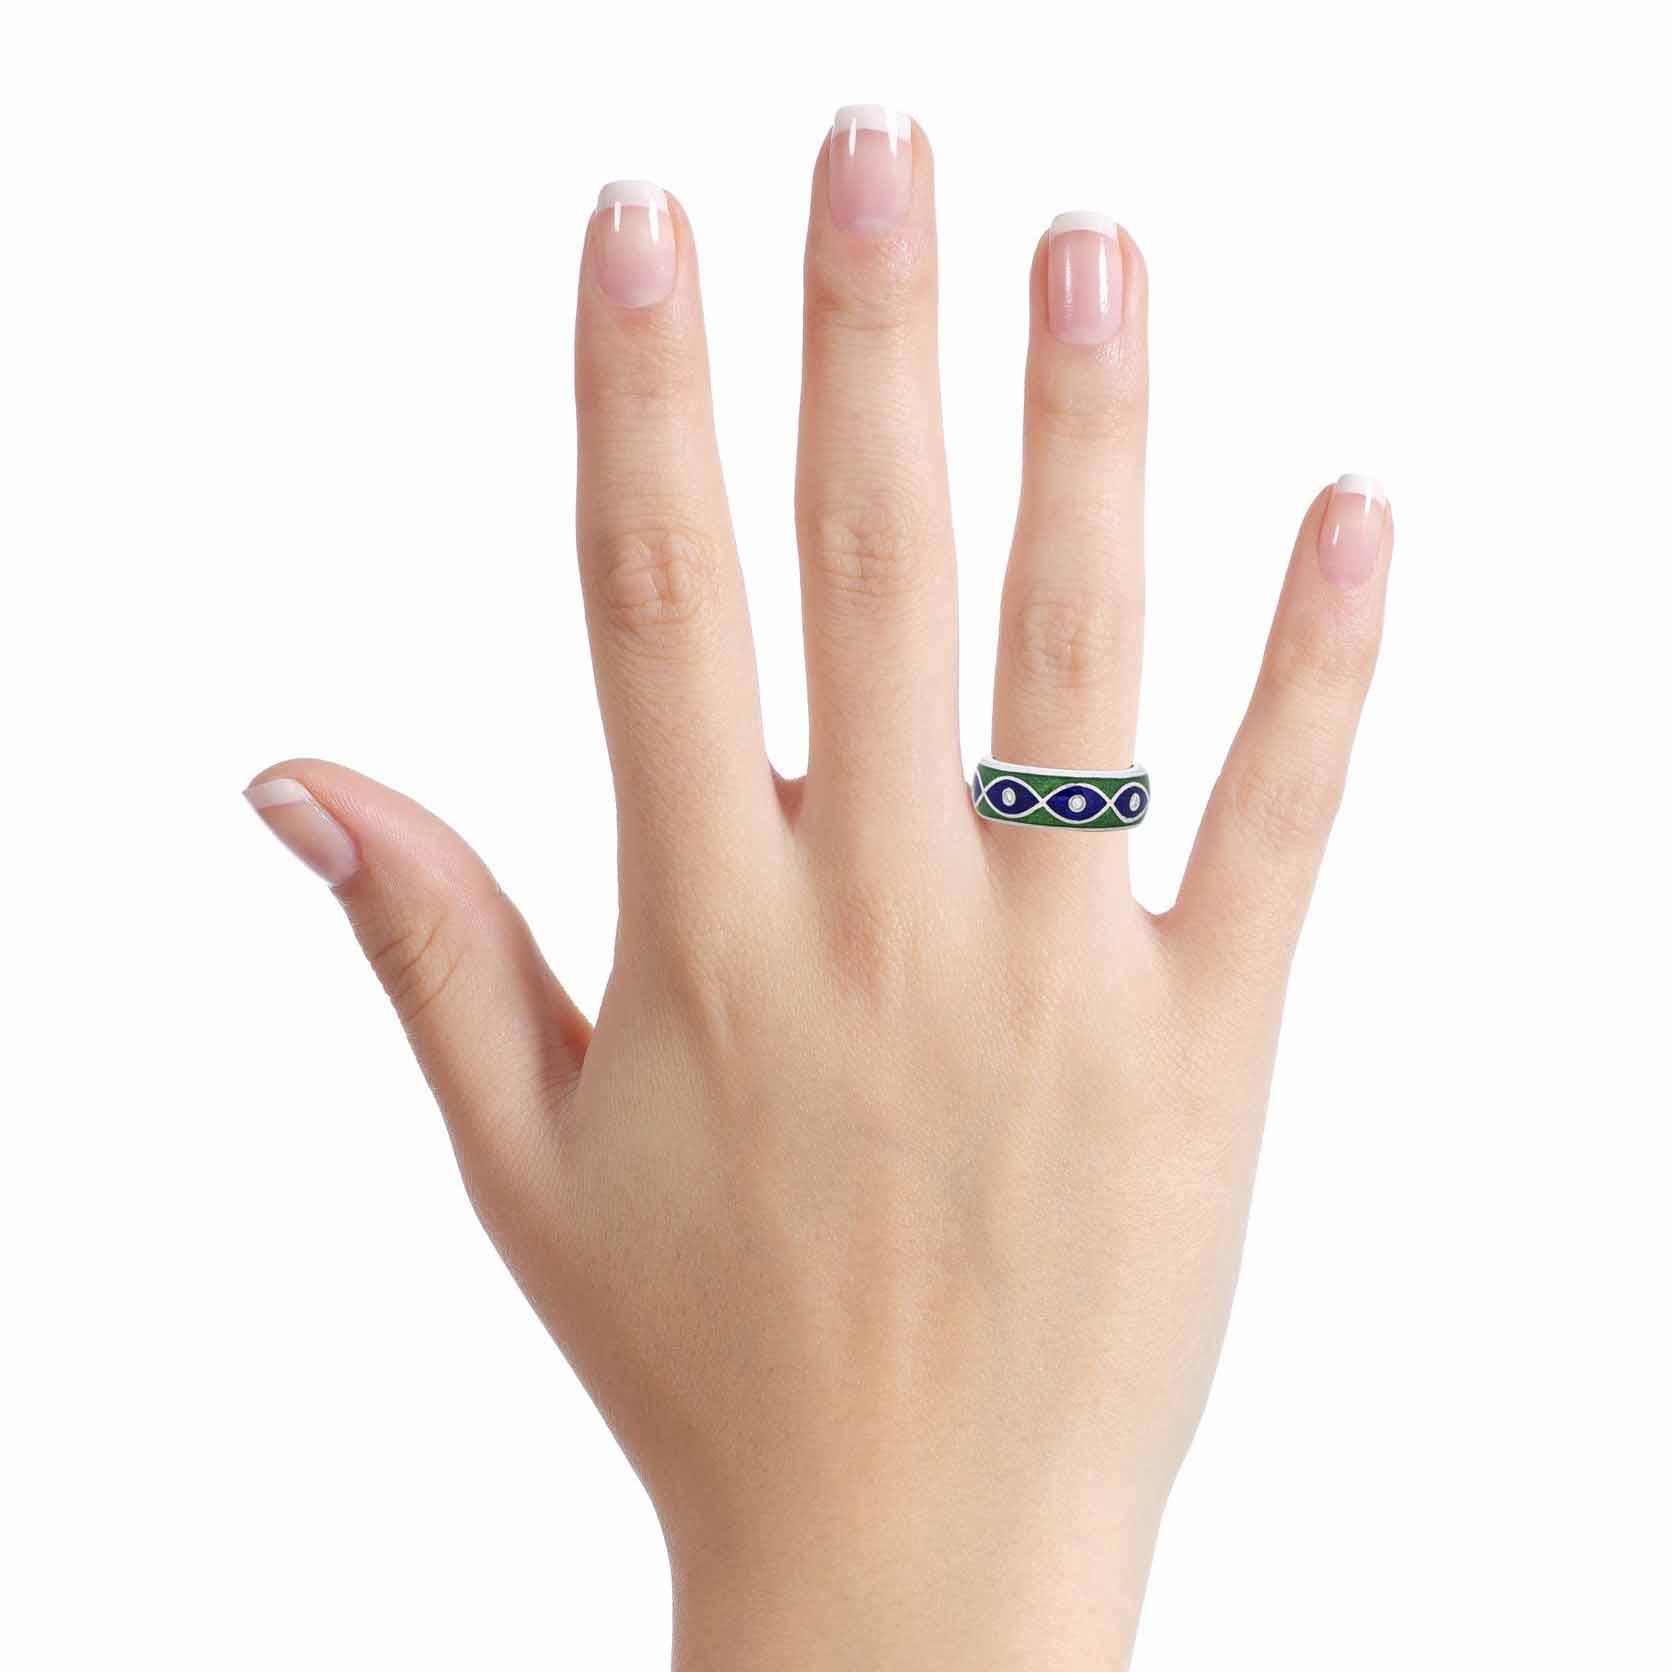 Susy Mor diamond enamel ring in 14-karat white gold. Polished metal band artistically decorated with green and blue enamel along with 8 round-cut natural diamonds. 

Size, 7
Width, 7mm
Depth, 2mm
Weight, 6.3 grams 
Diamond Total Carat Weight, .15